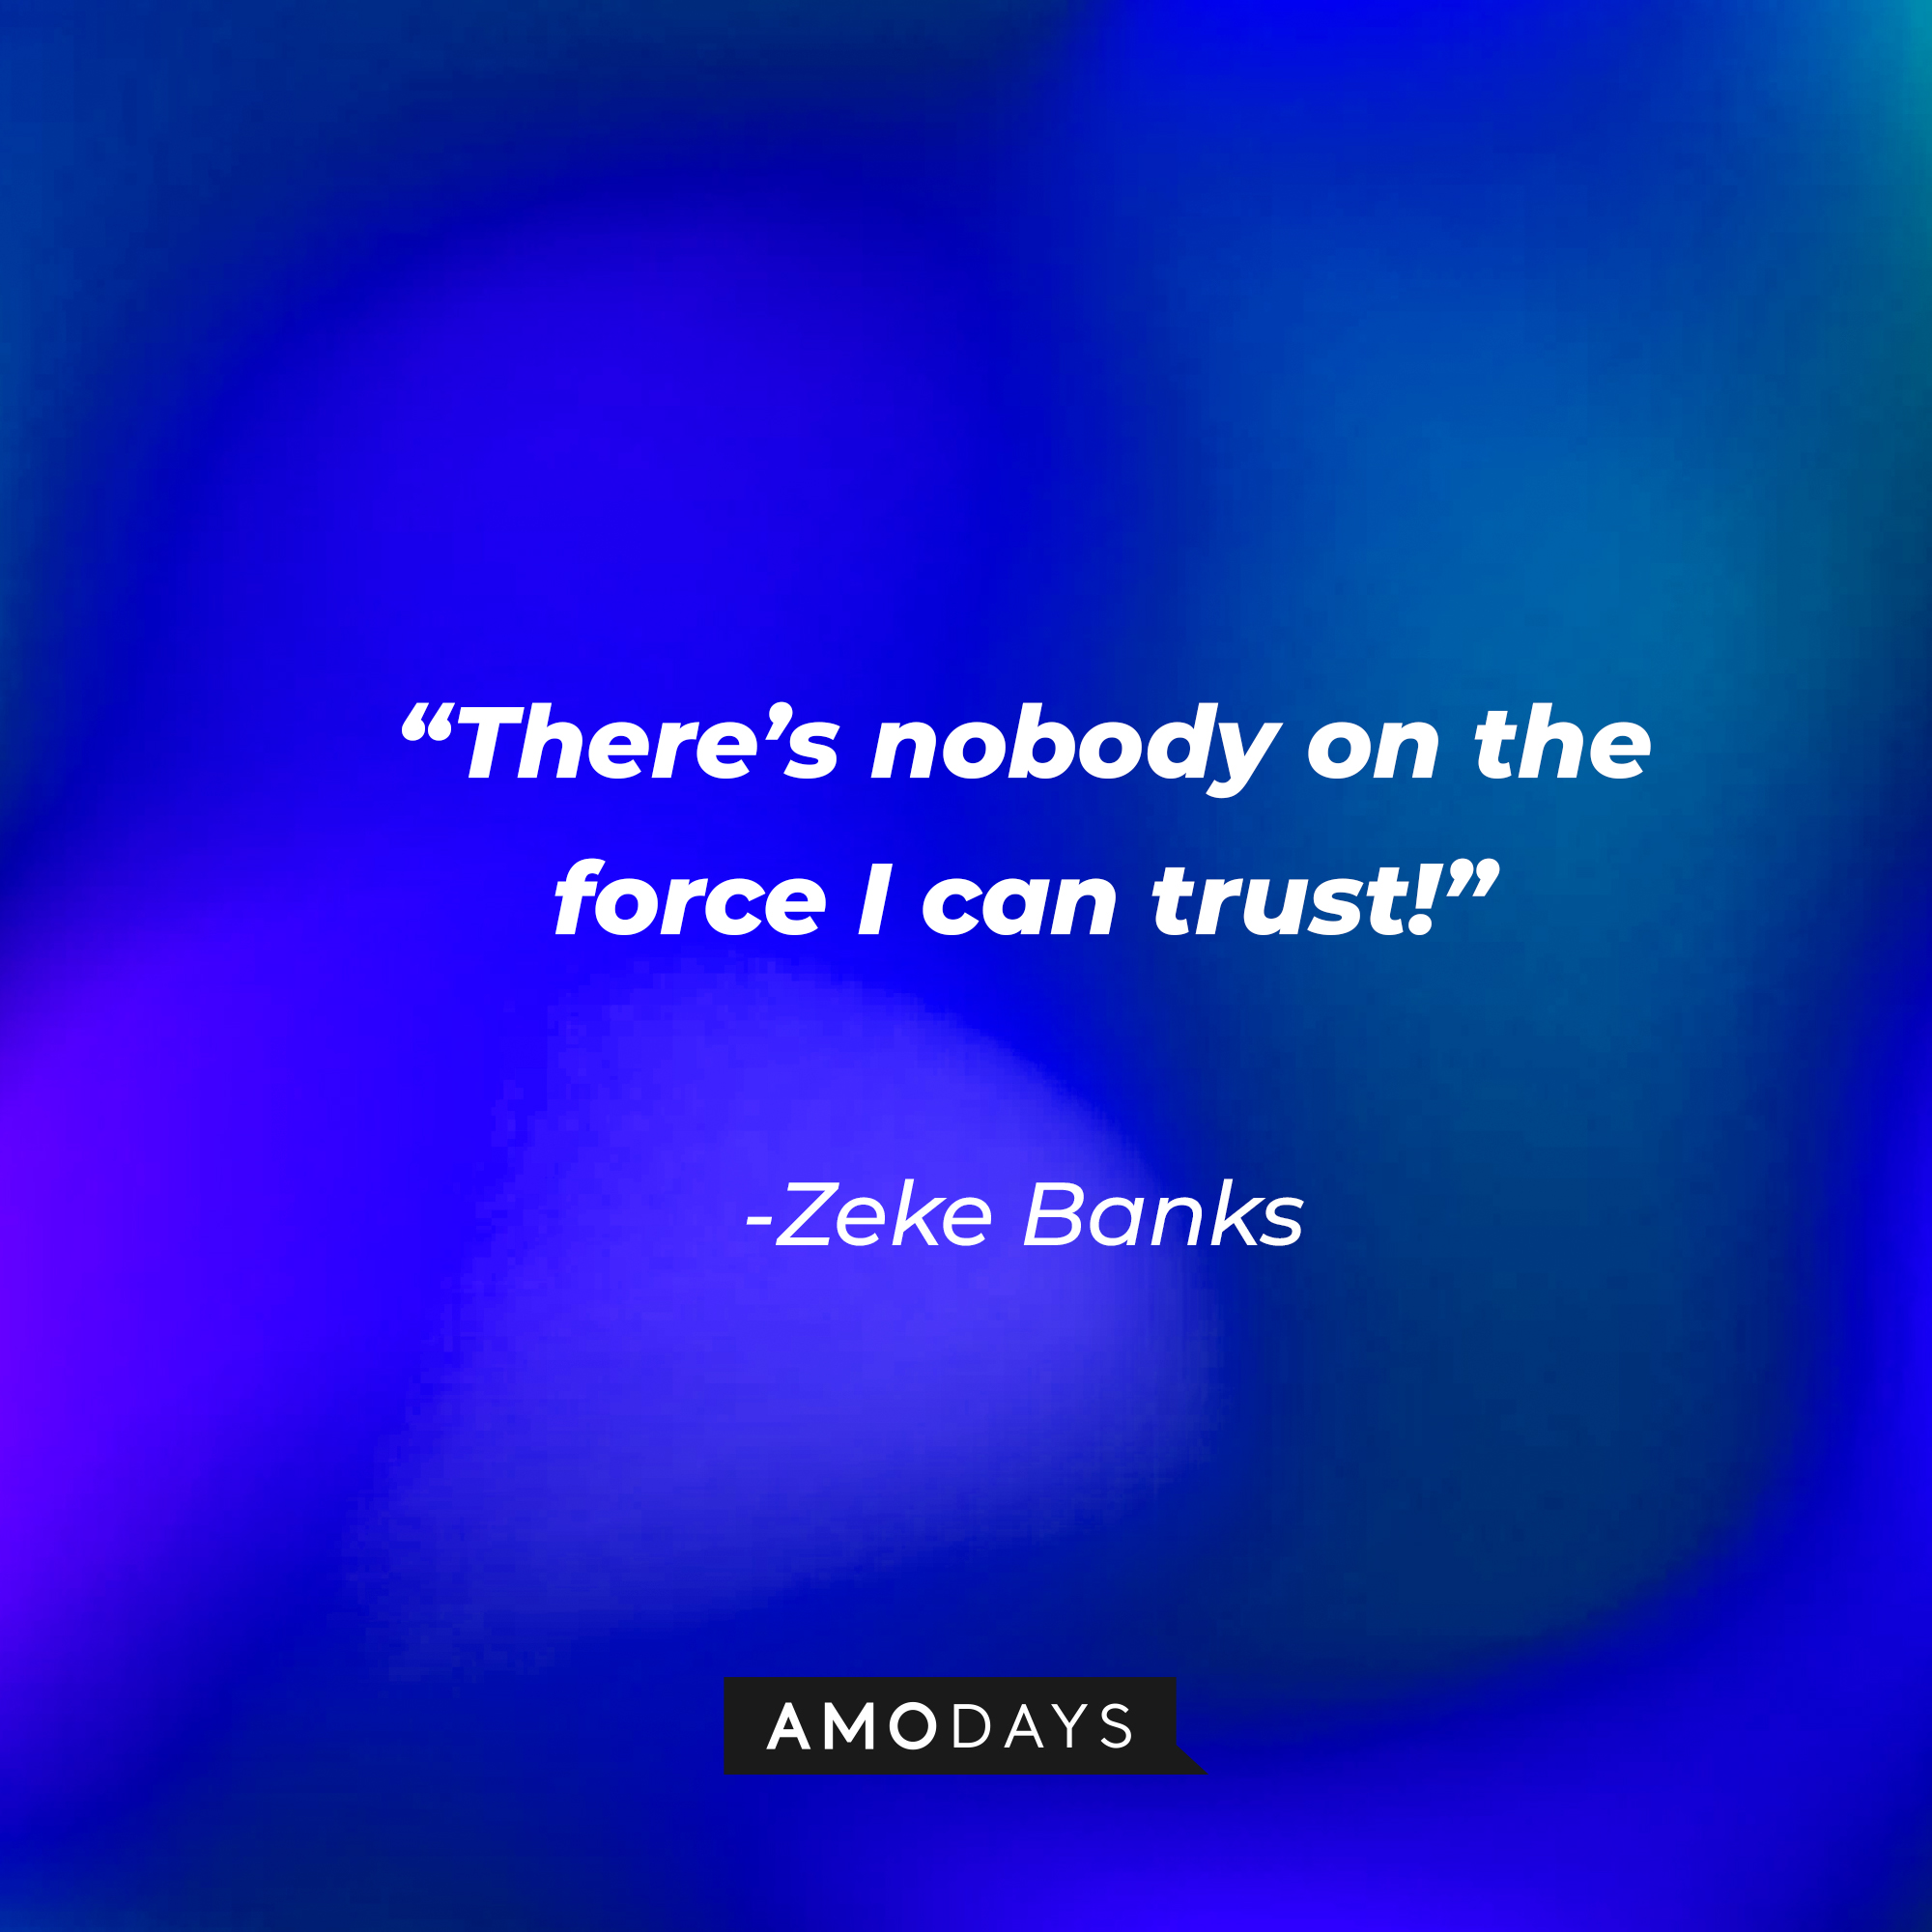 Zeke Banks's quote: “There’s nobody on the force I can trust!" | Source: Amodays